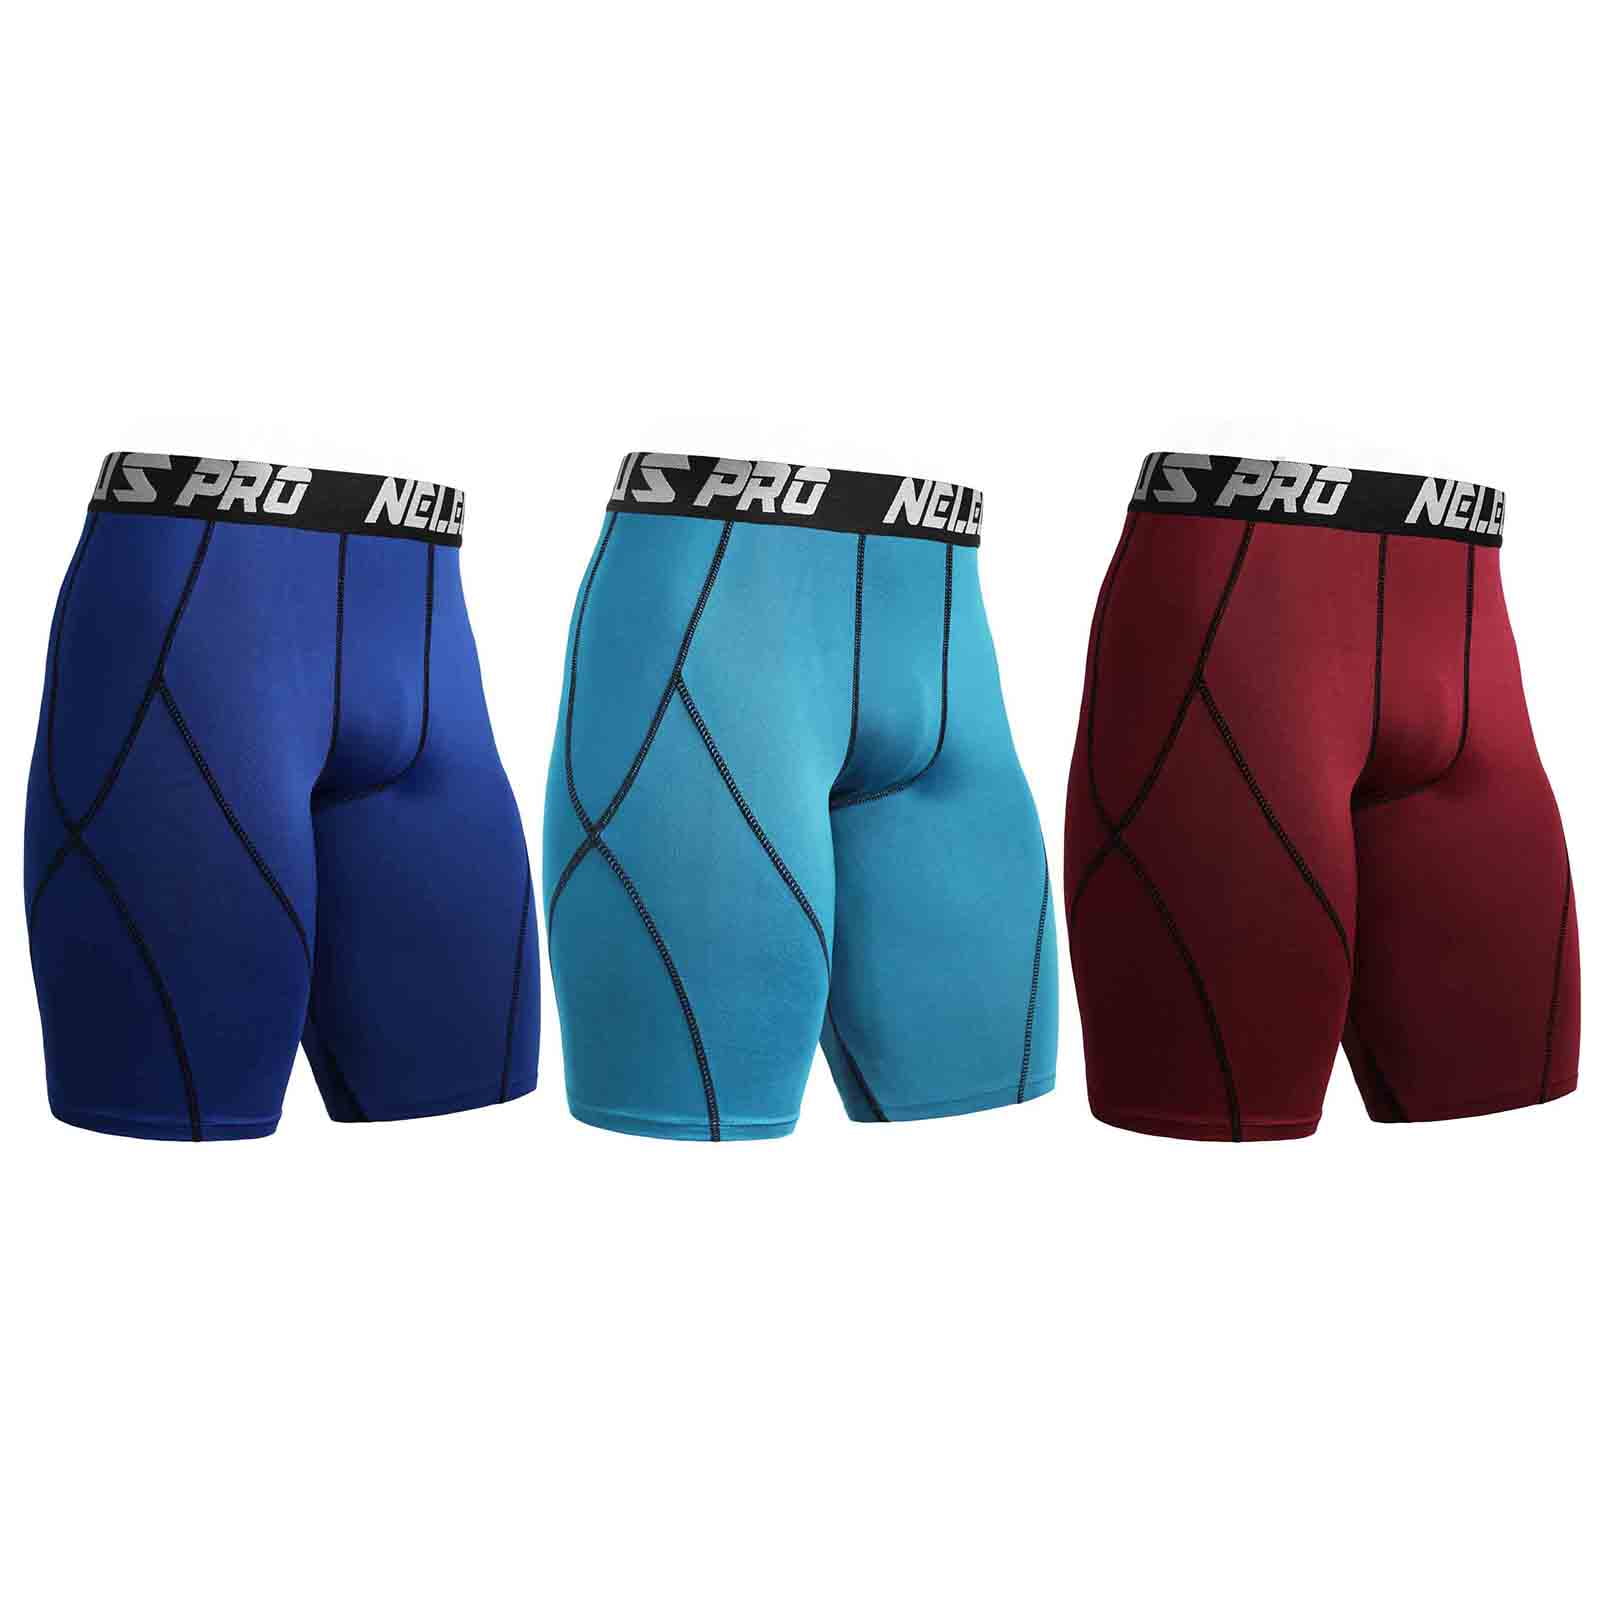 Details about   Men Sportswear T shirts Running Shorts Gym Compression Tights Long Pants Shirts 